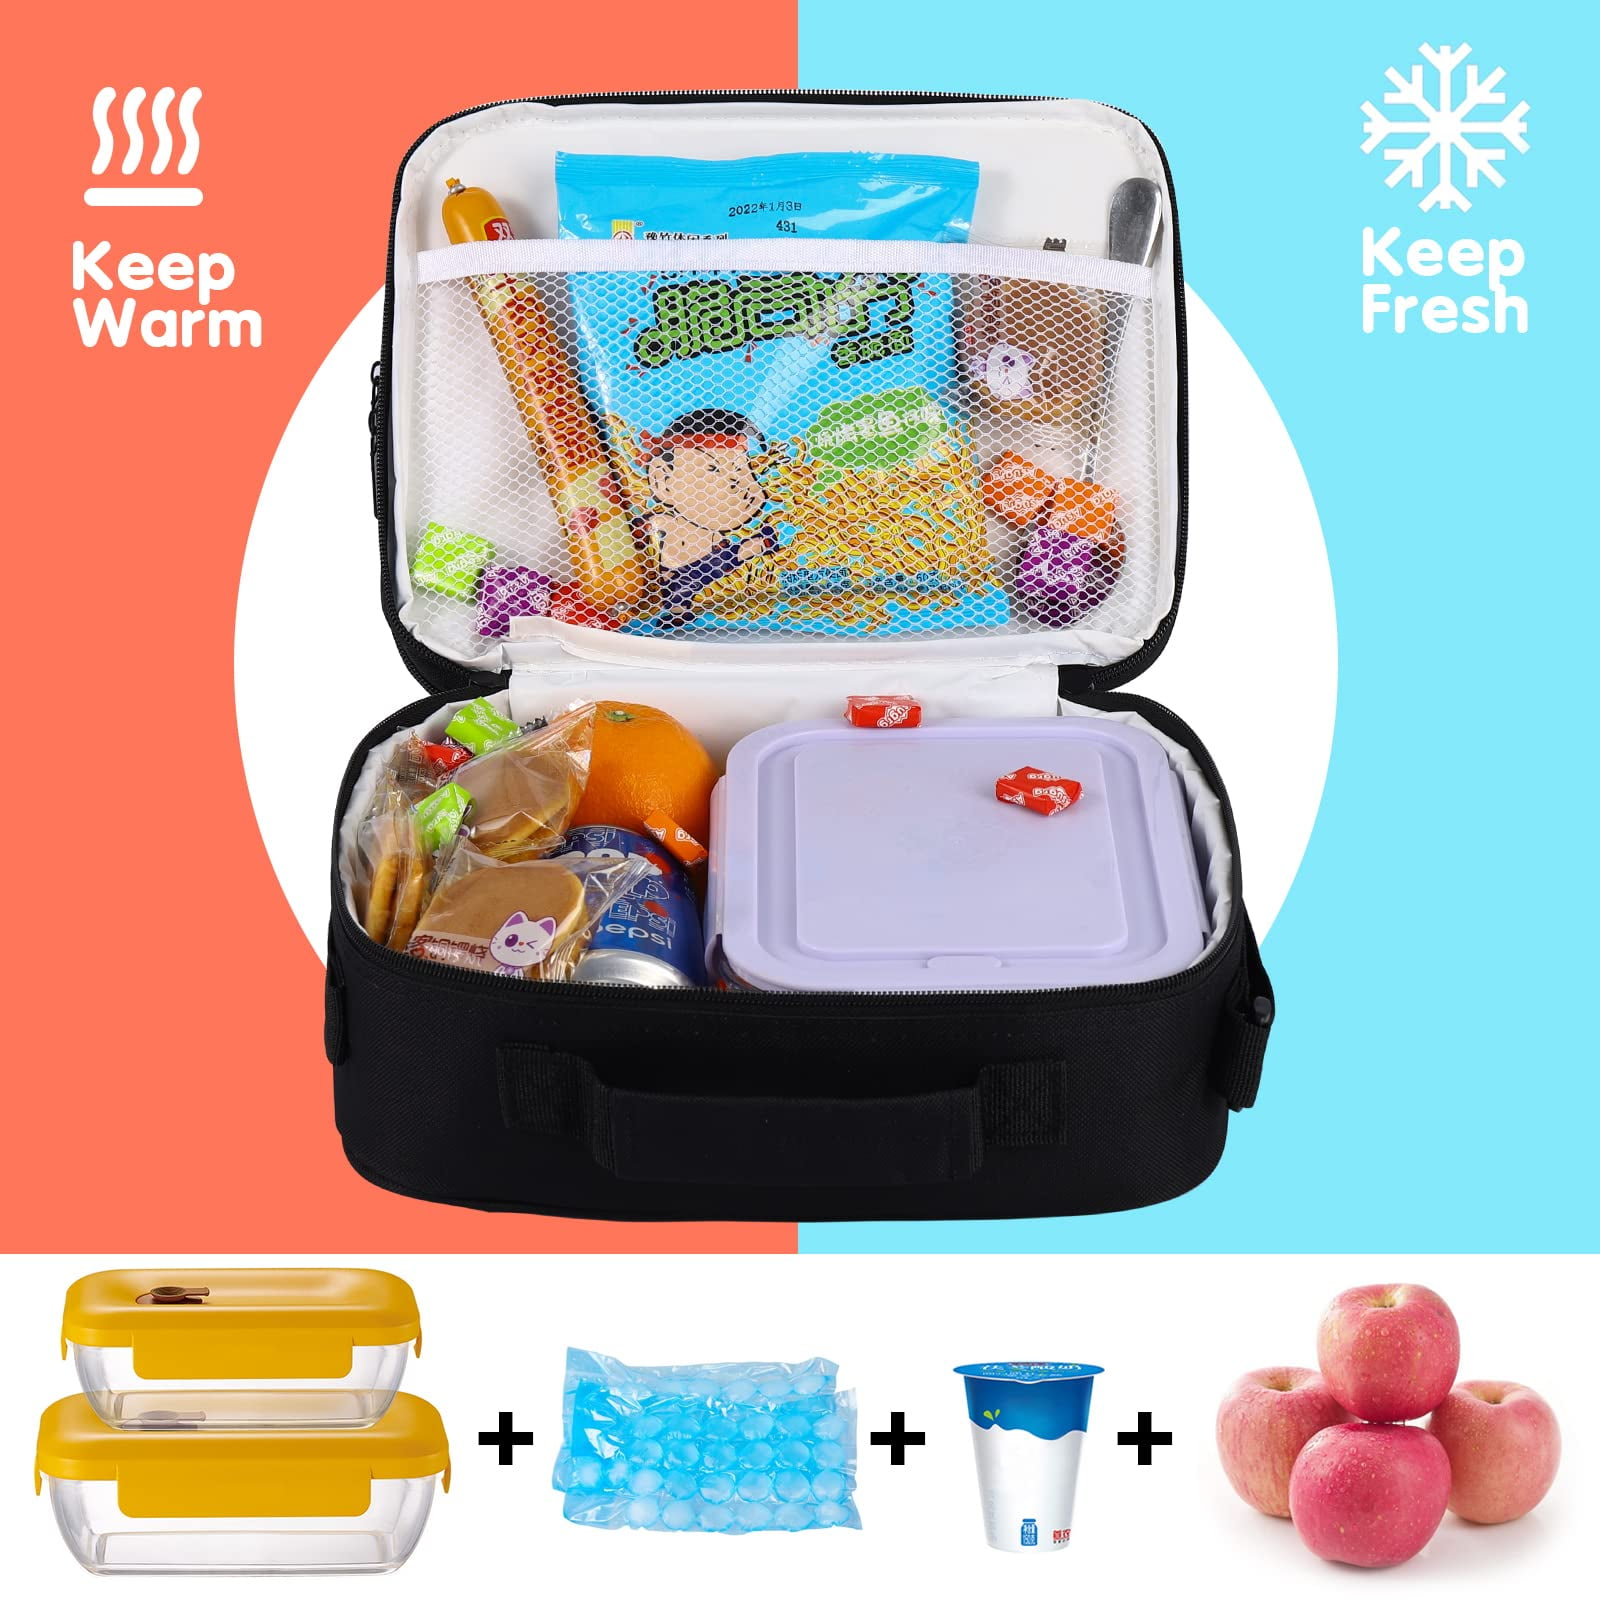 Girls Lunch Boxes for School,Pop Kids Lunch Box Bag for little Girls Back  to School,Insulated Lunch …See more Girls Lunch Boxes for School,Pop Kids